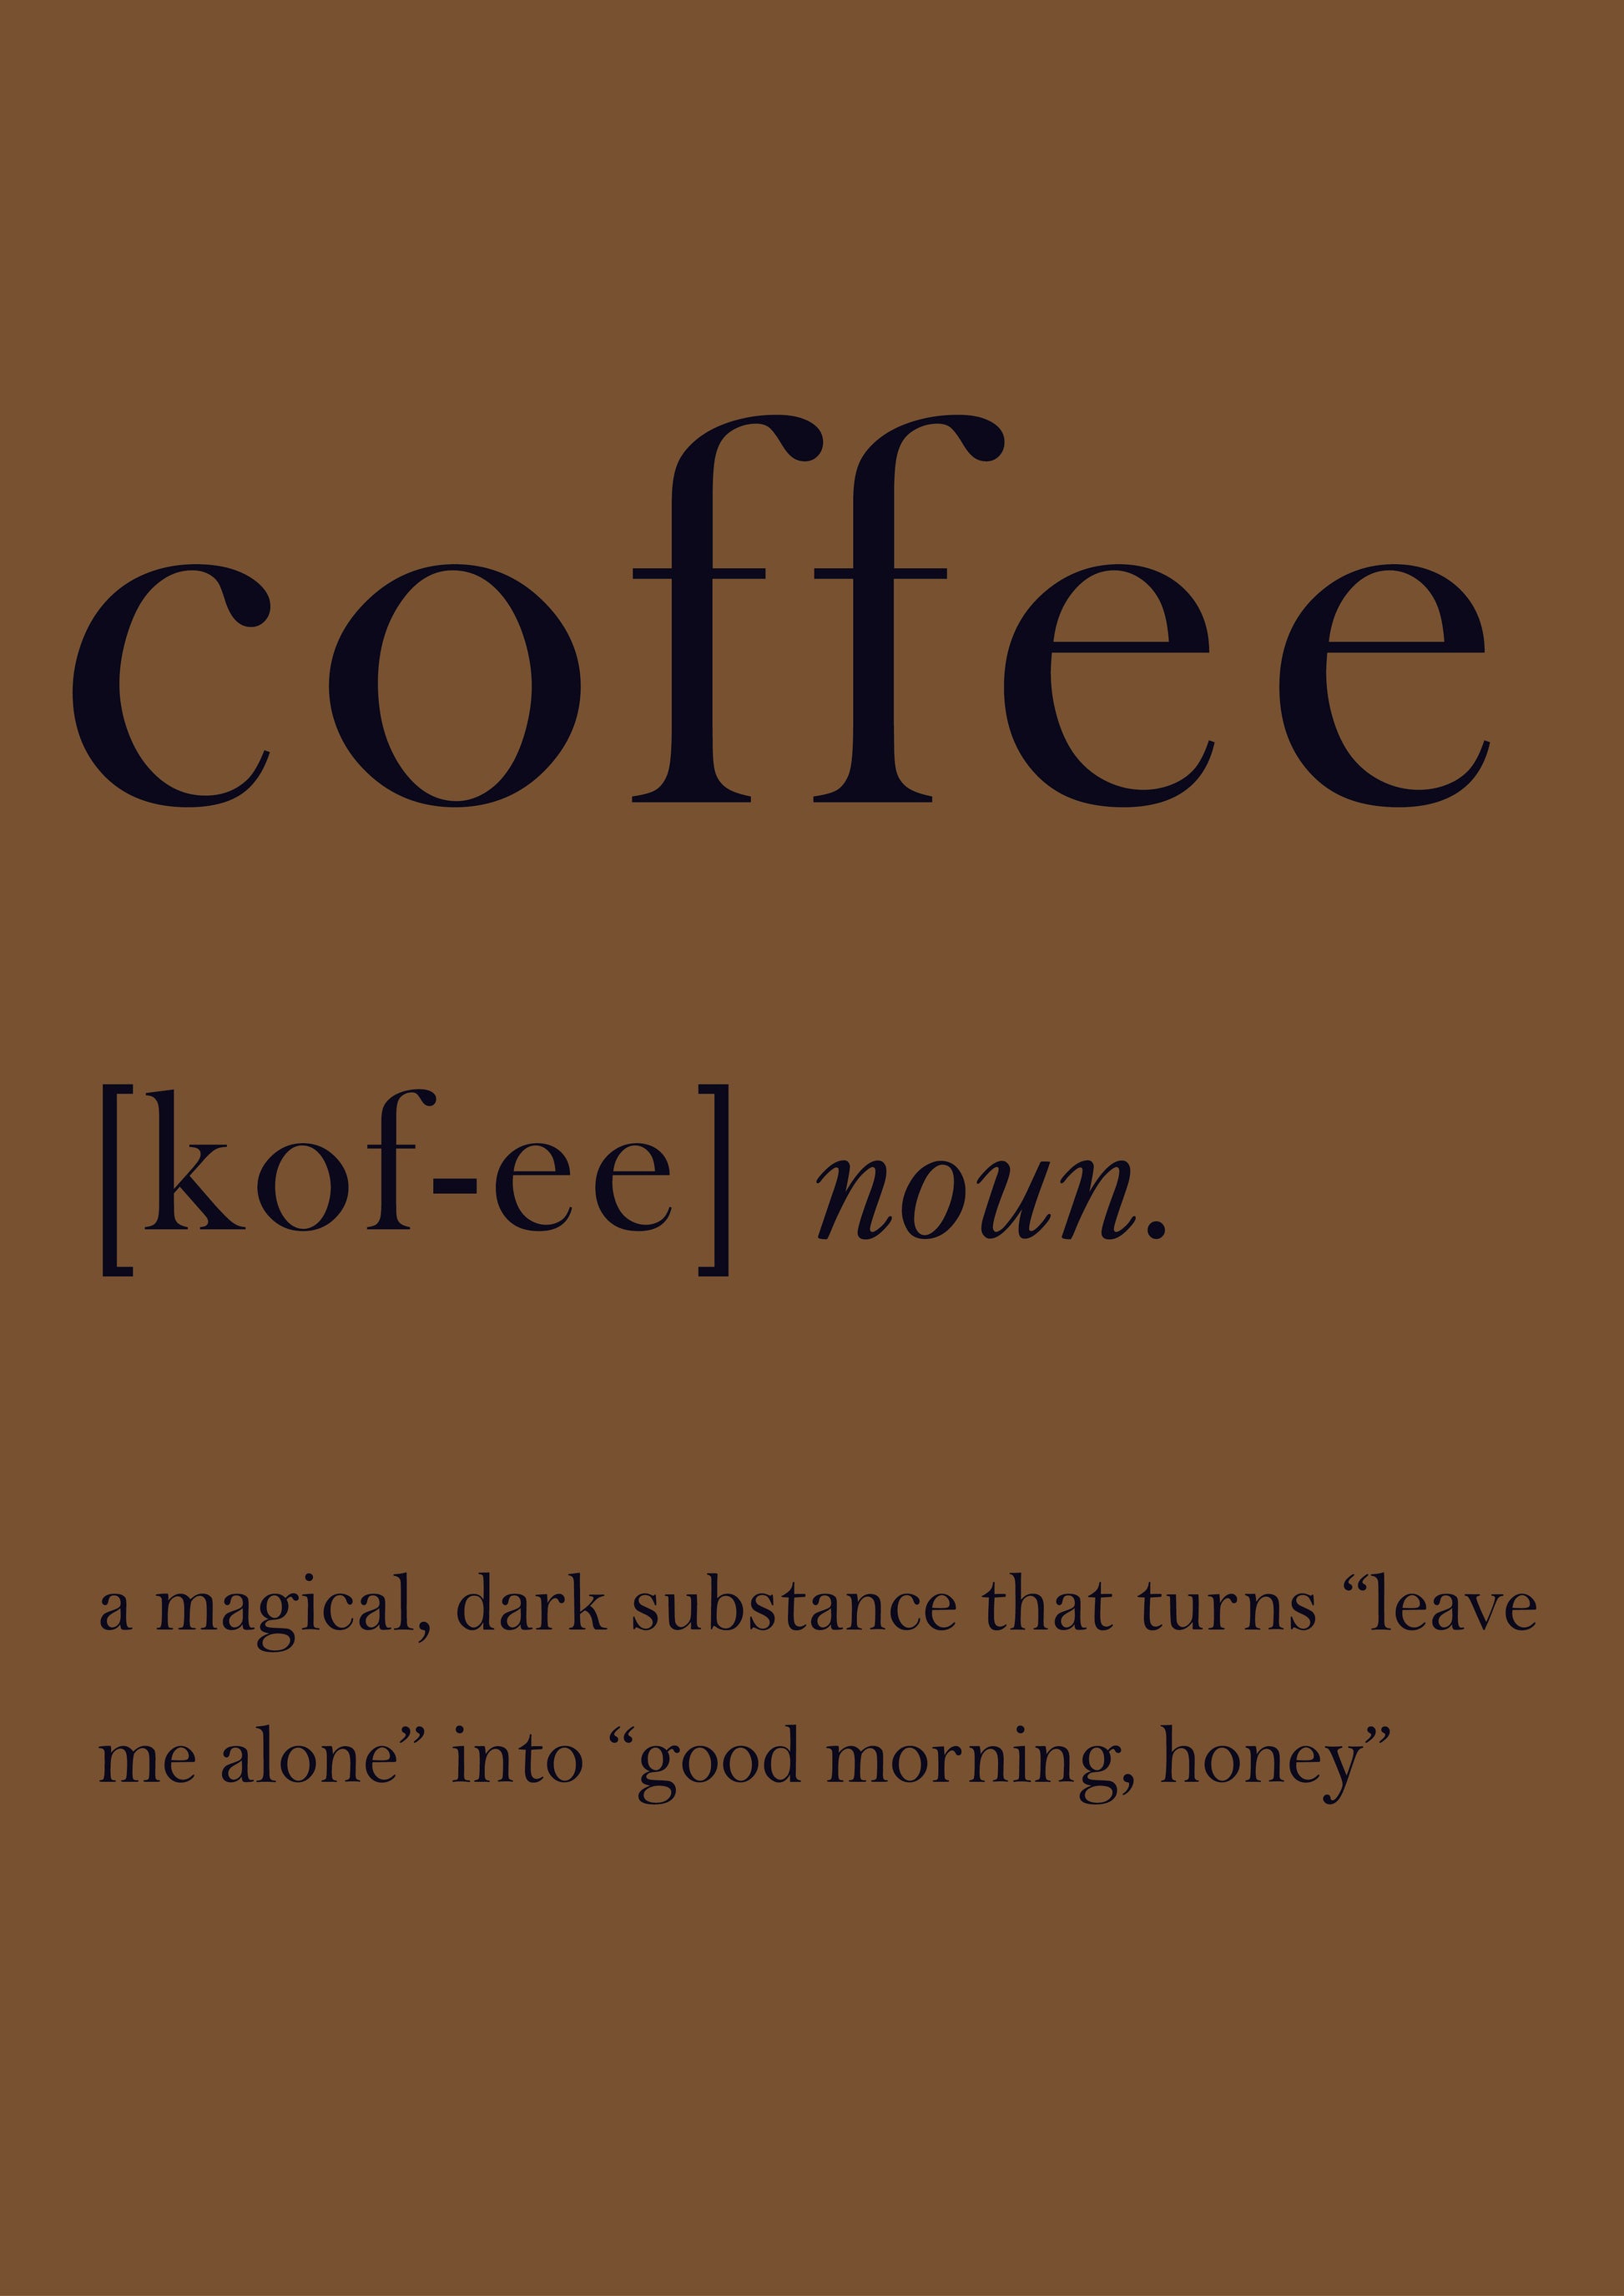 A magical, dark substance that turns "leave me alone" into"good morning, honey"